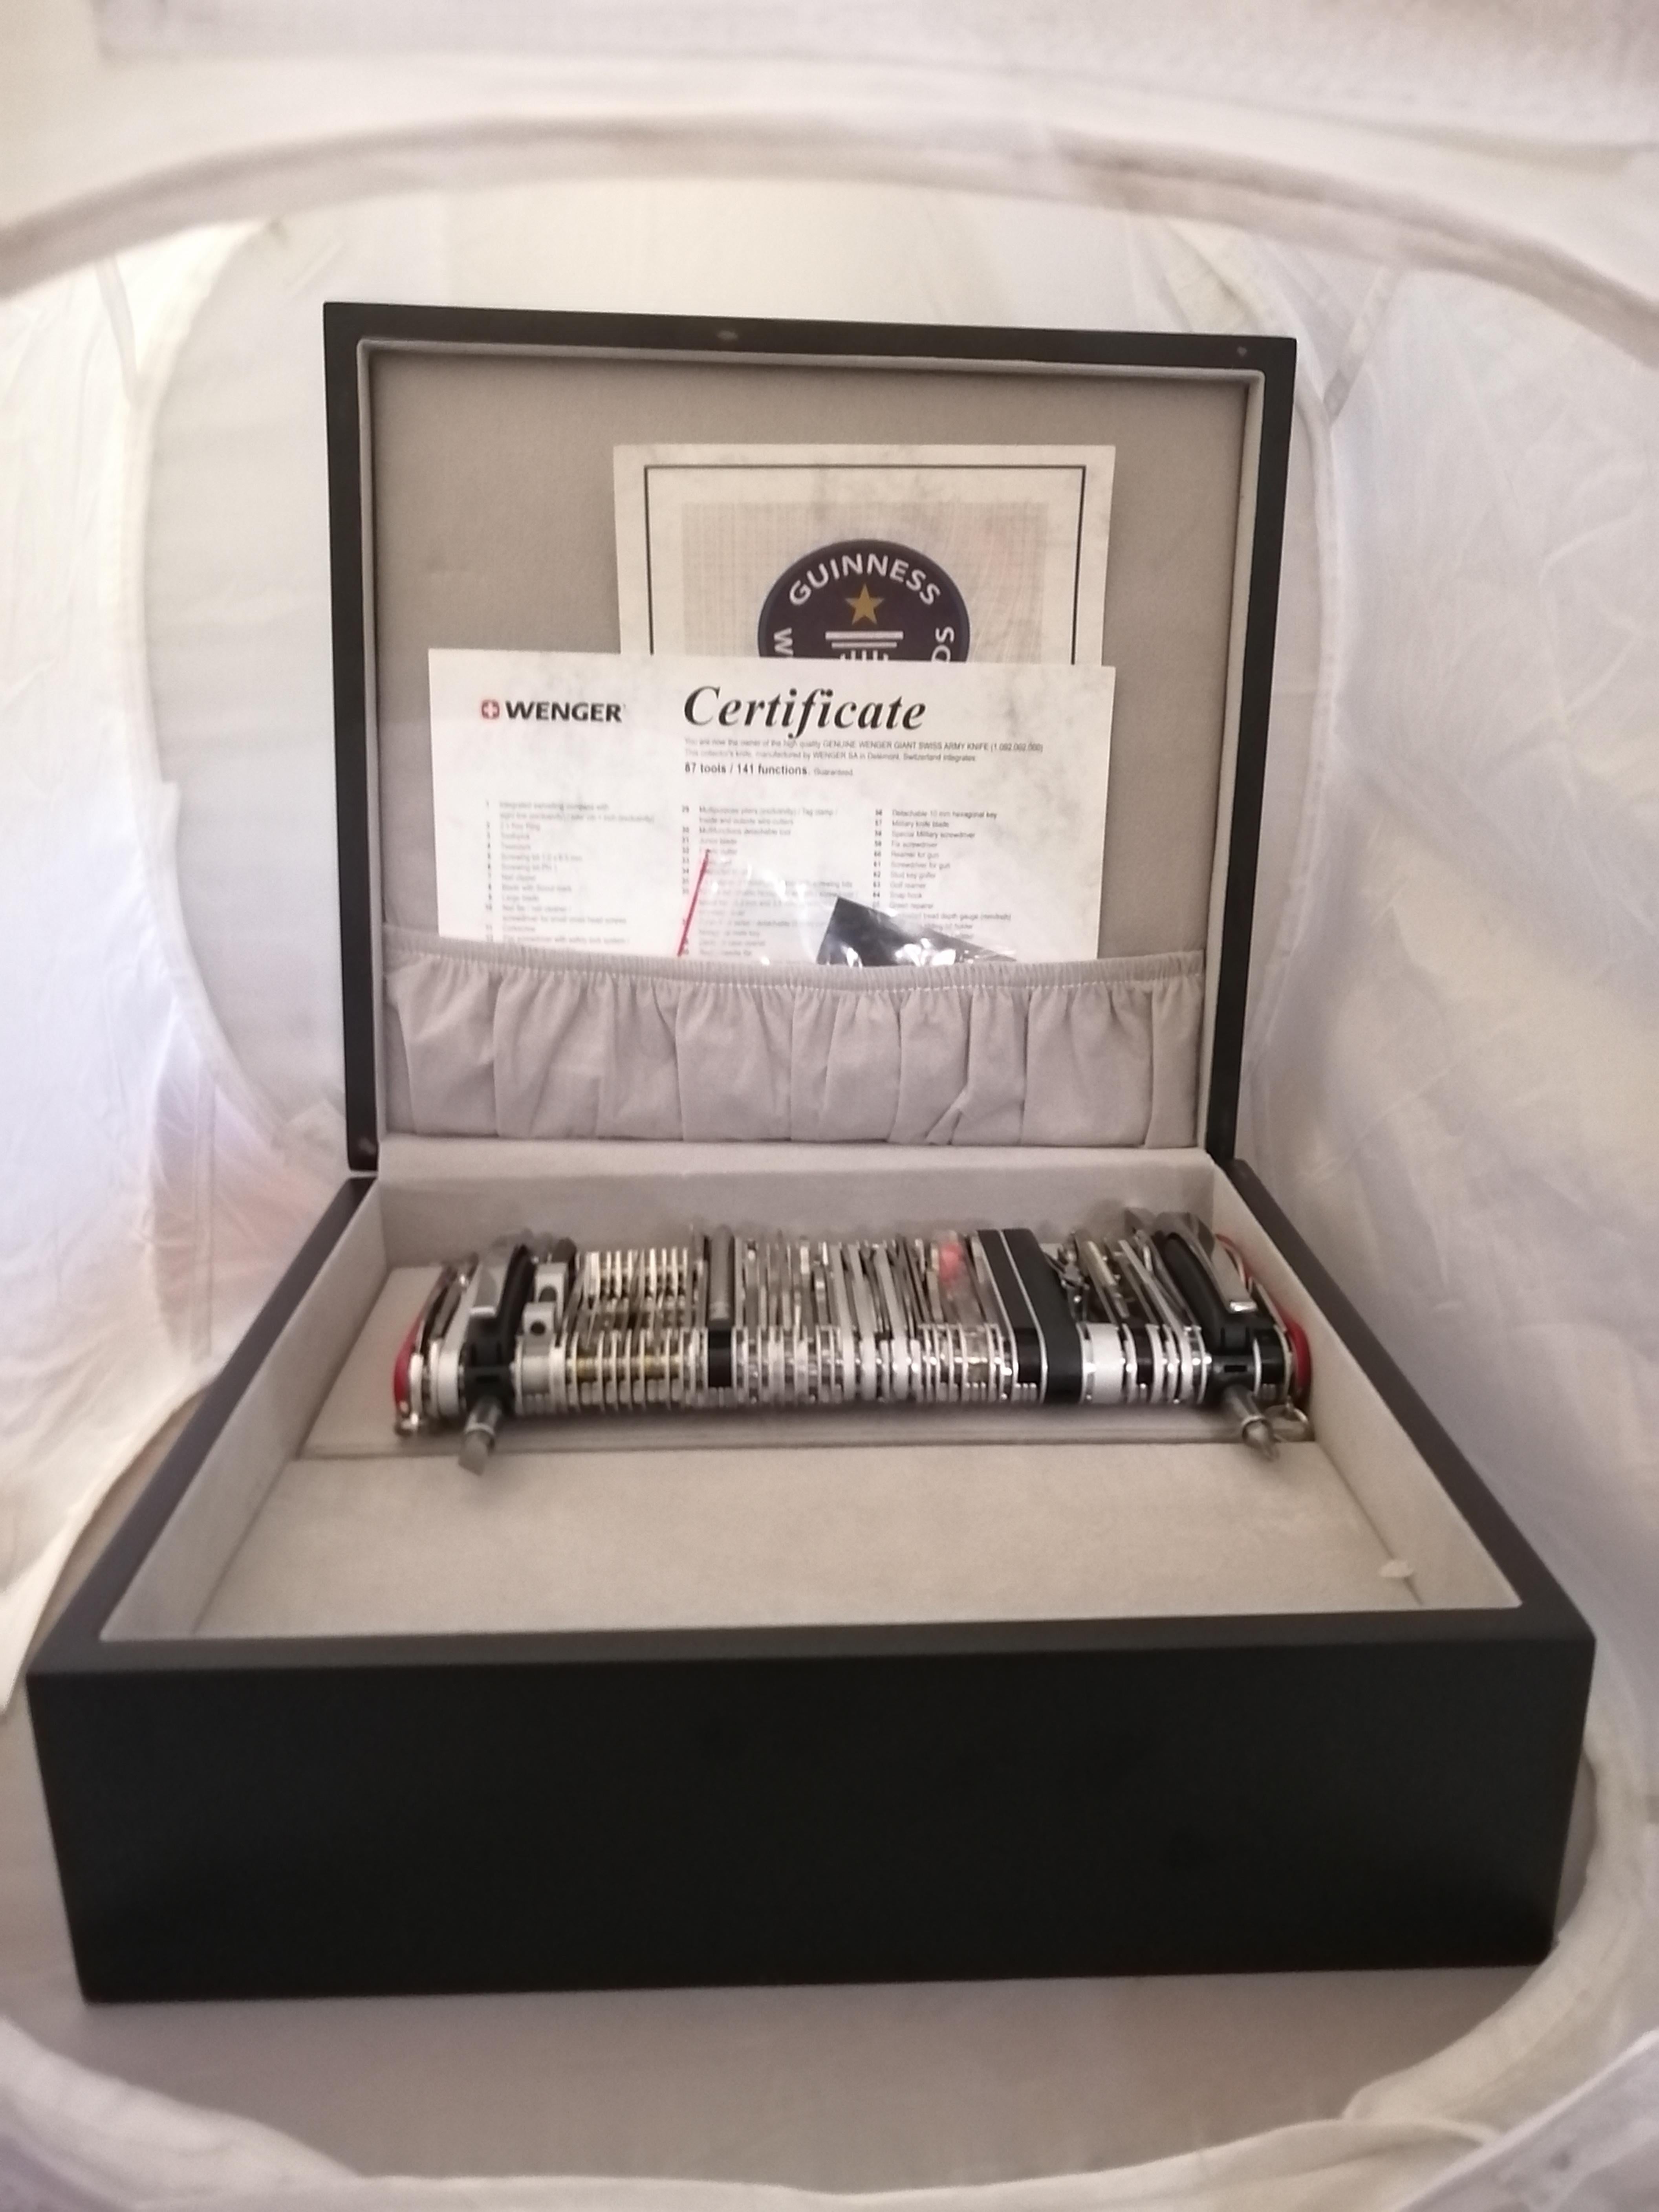 A Wenger SA Giant Swiss Army 16999 giant knife 2007 manufactured in Délemont, Switzerland. This Guinness world record Swiss knife contains 87 tools that can be used for 141 different functions. It includes 2 certificates, a warranty certificate a